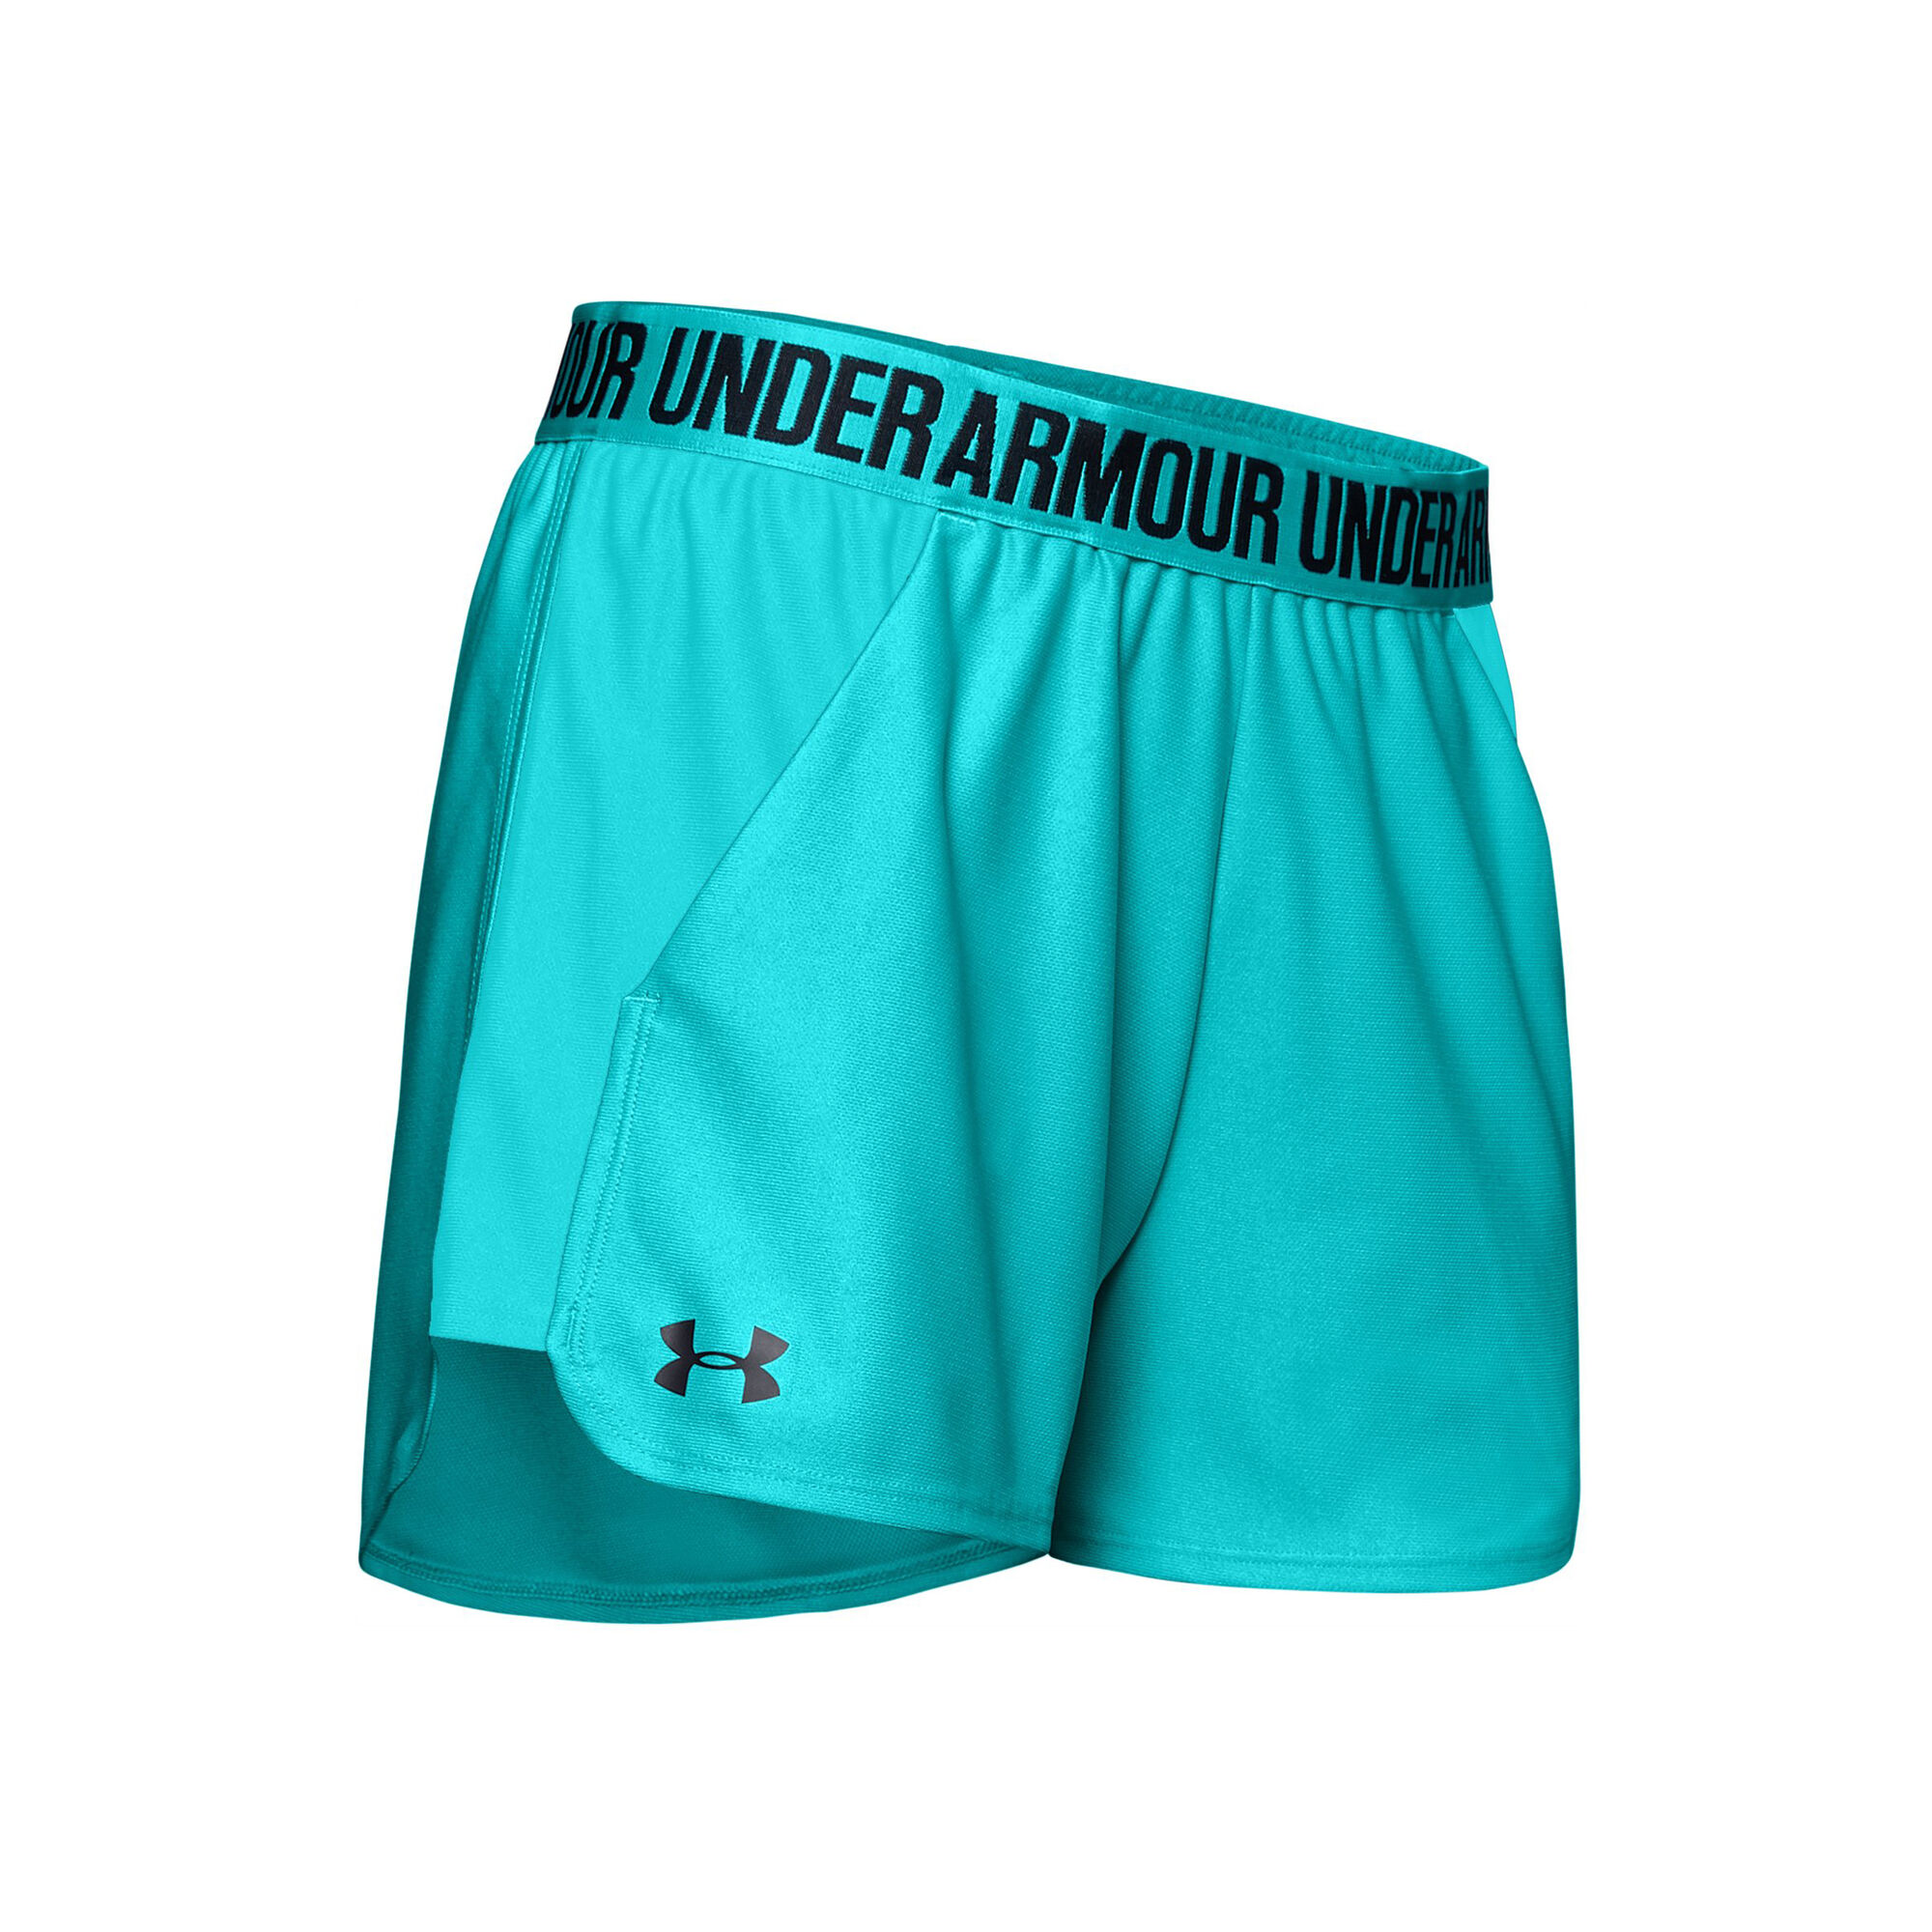 Under Armour Play 2.0 Shorts Mujeres - Turquesa, Negro compra online | Tennis-Point